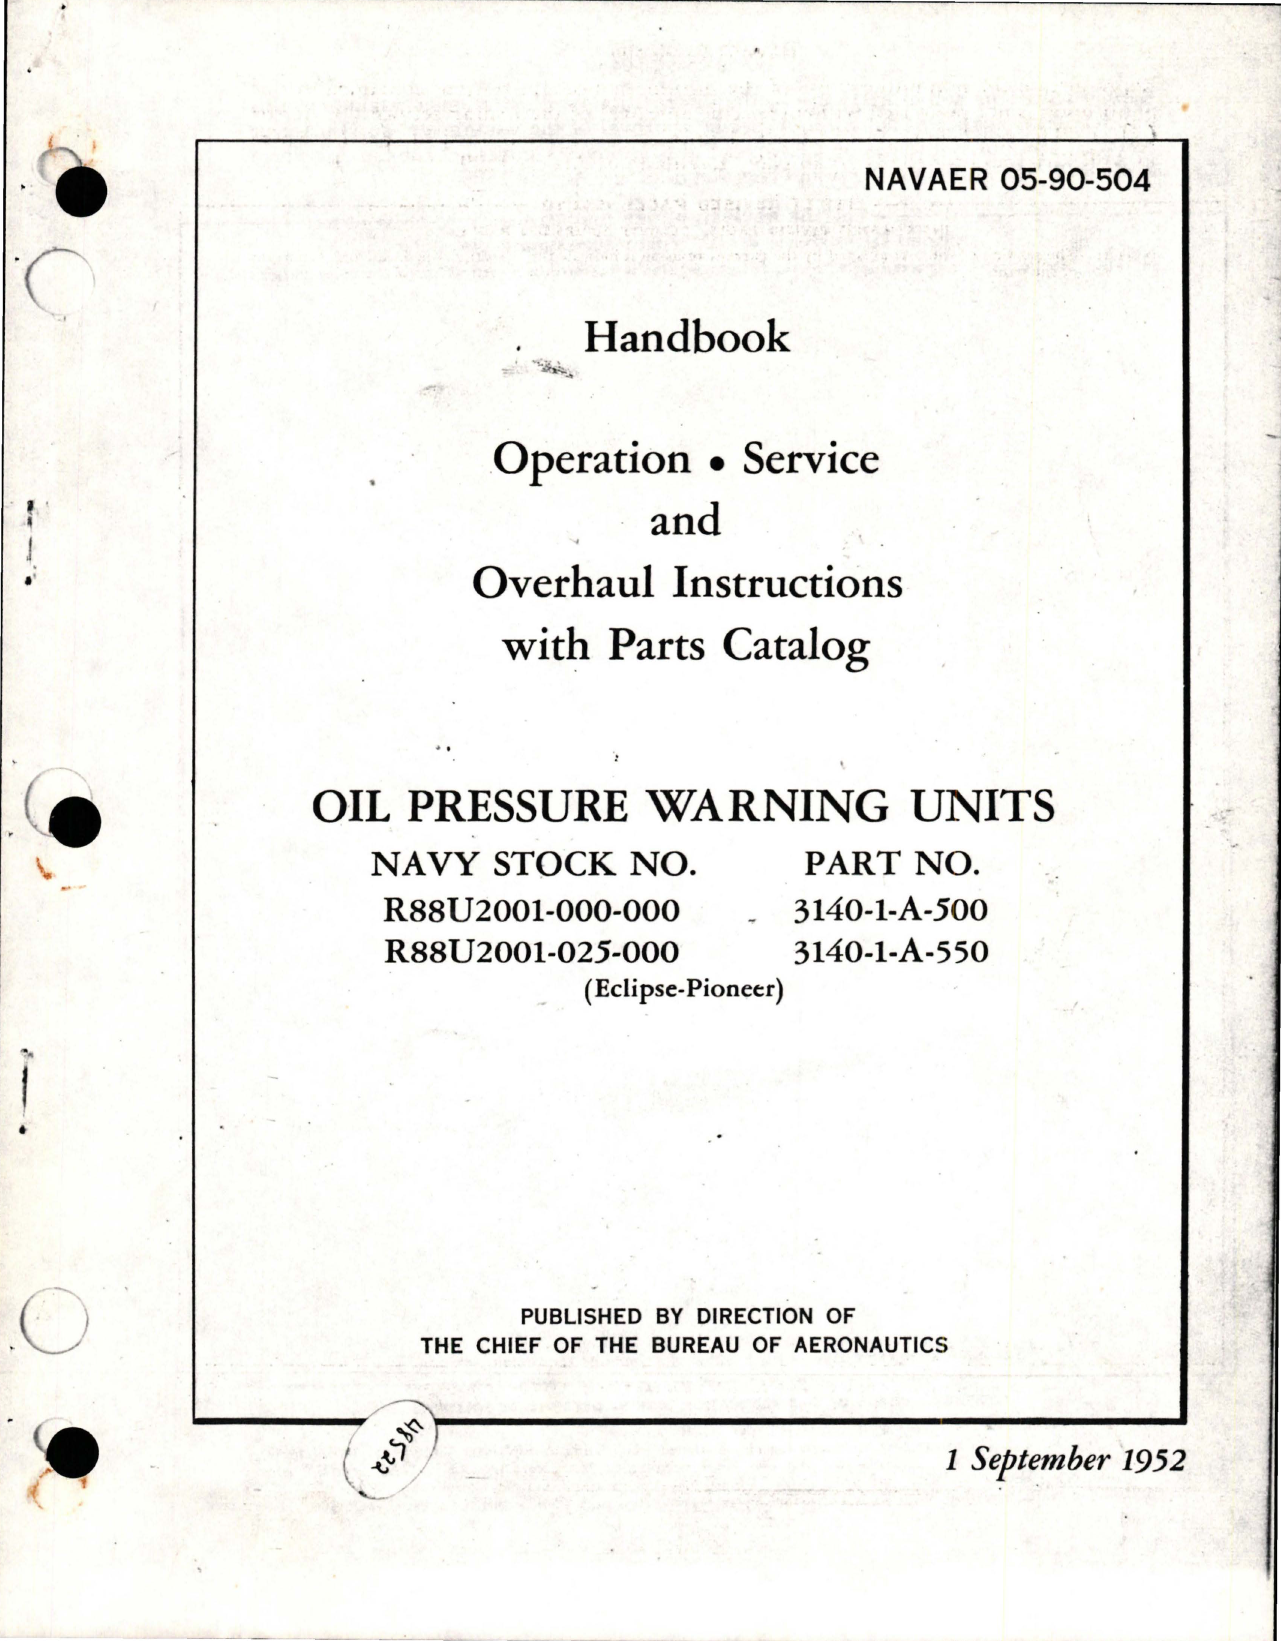 Sample page 1 from AirCorps Library document: Operation, Service and Overhaul with Parts for Oil Pressure Warning Unit - Parts 3140-1-A-500 and 3140-1-A-550